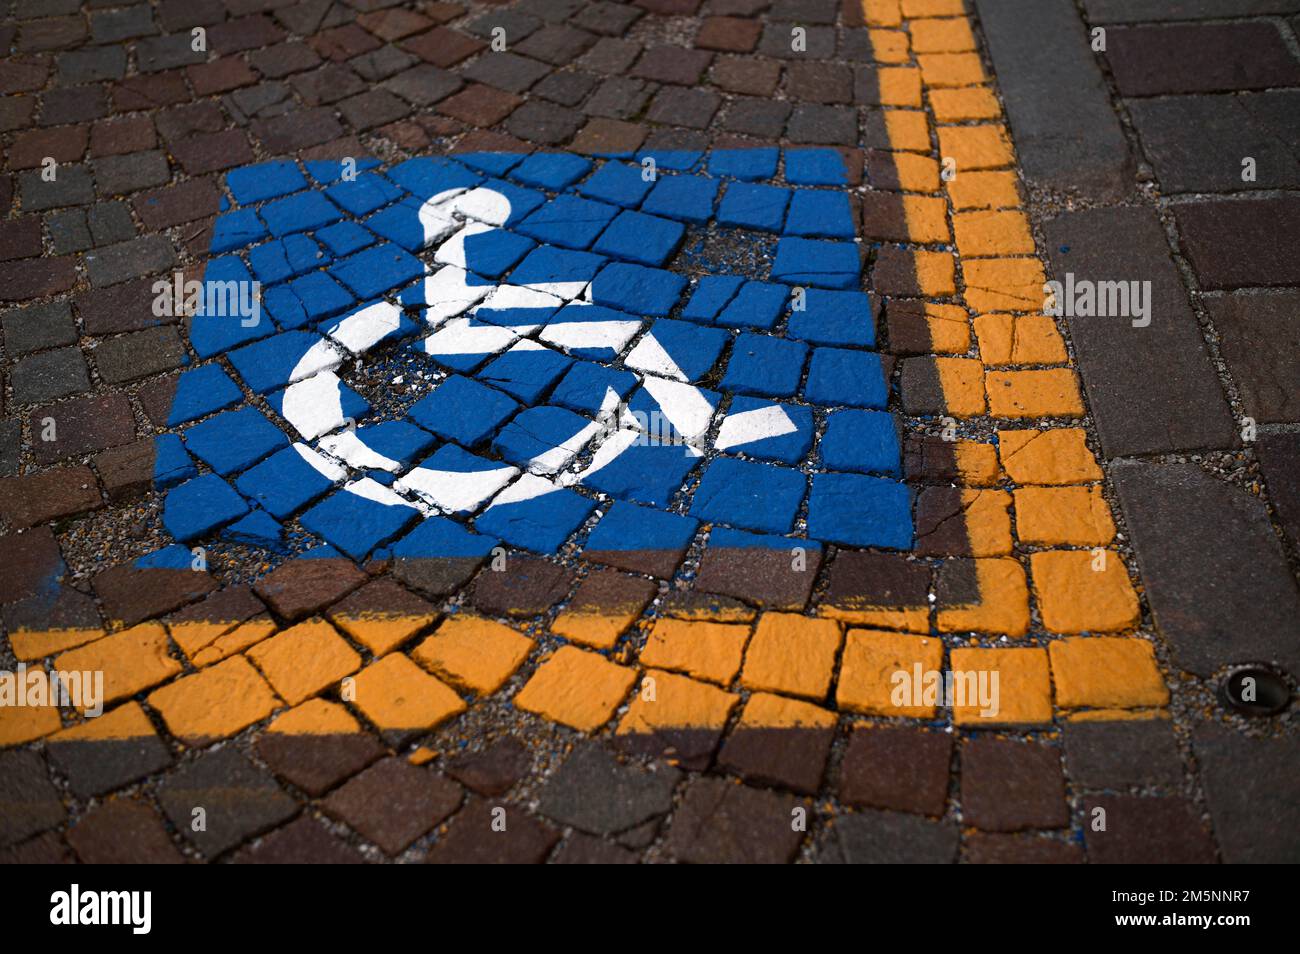 Reserved for wheelchair, severely disabled, marking on pavement, Ortisei, Val Gardena, South Tyrol, Italy Stock Photo